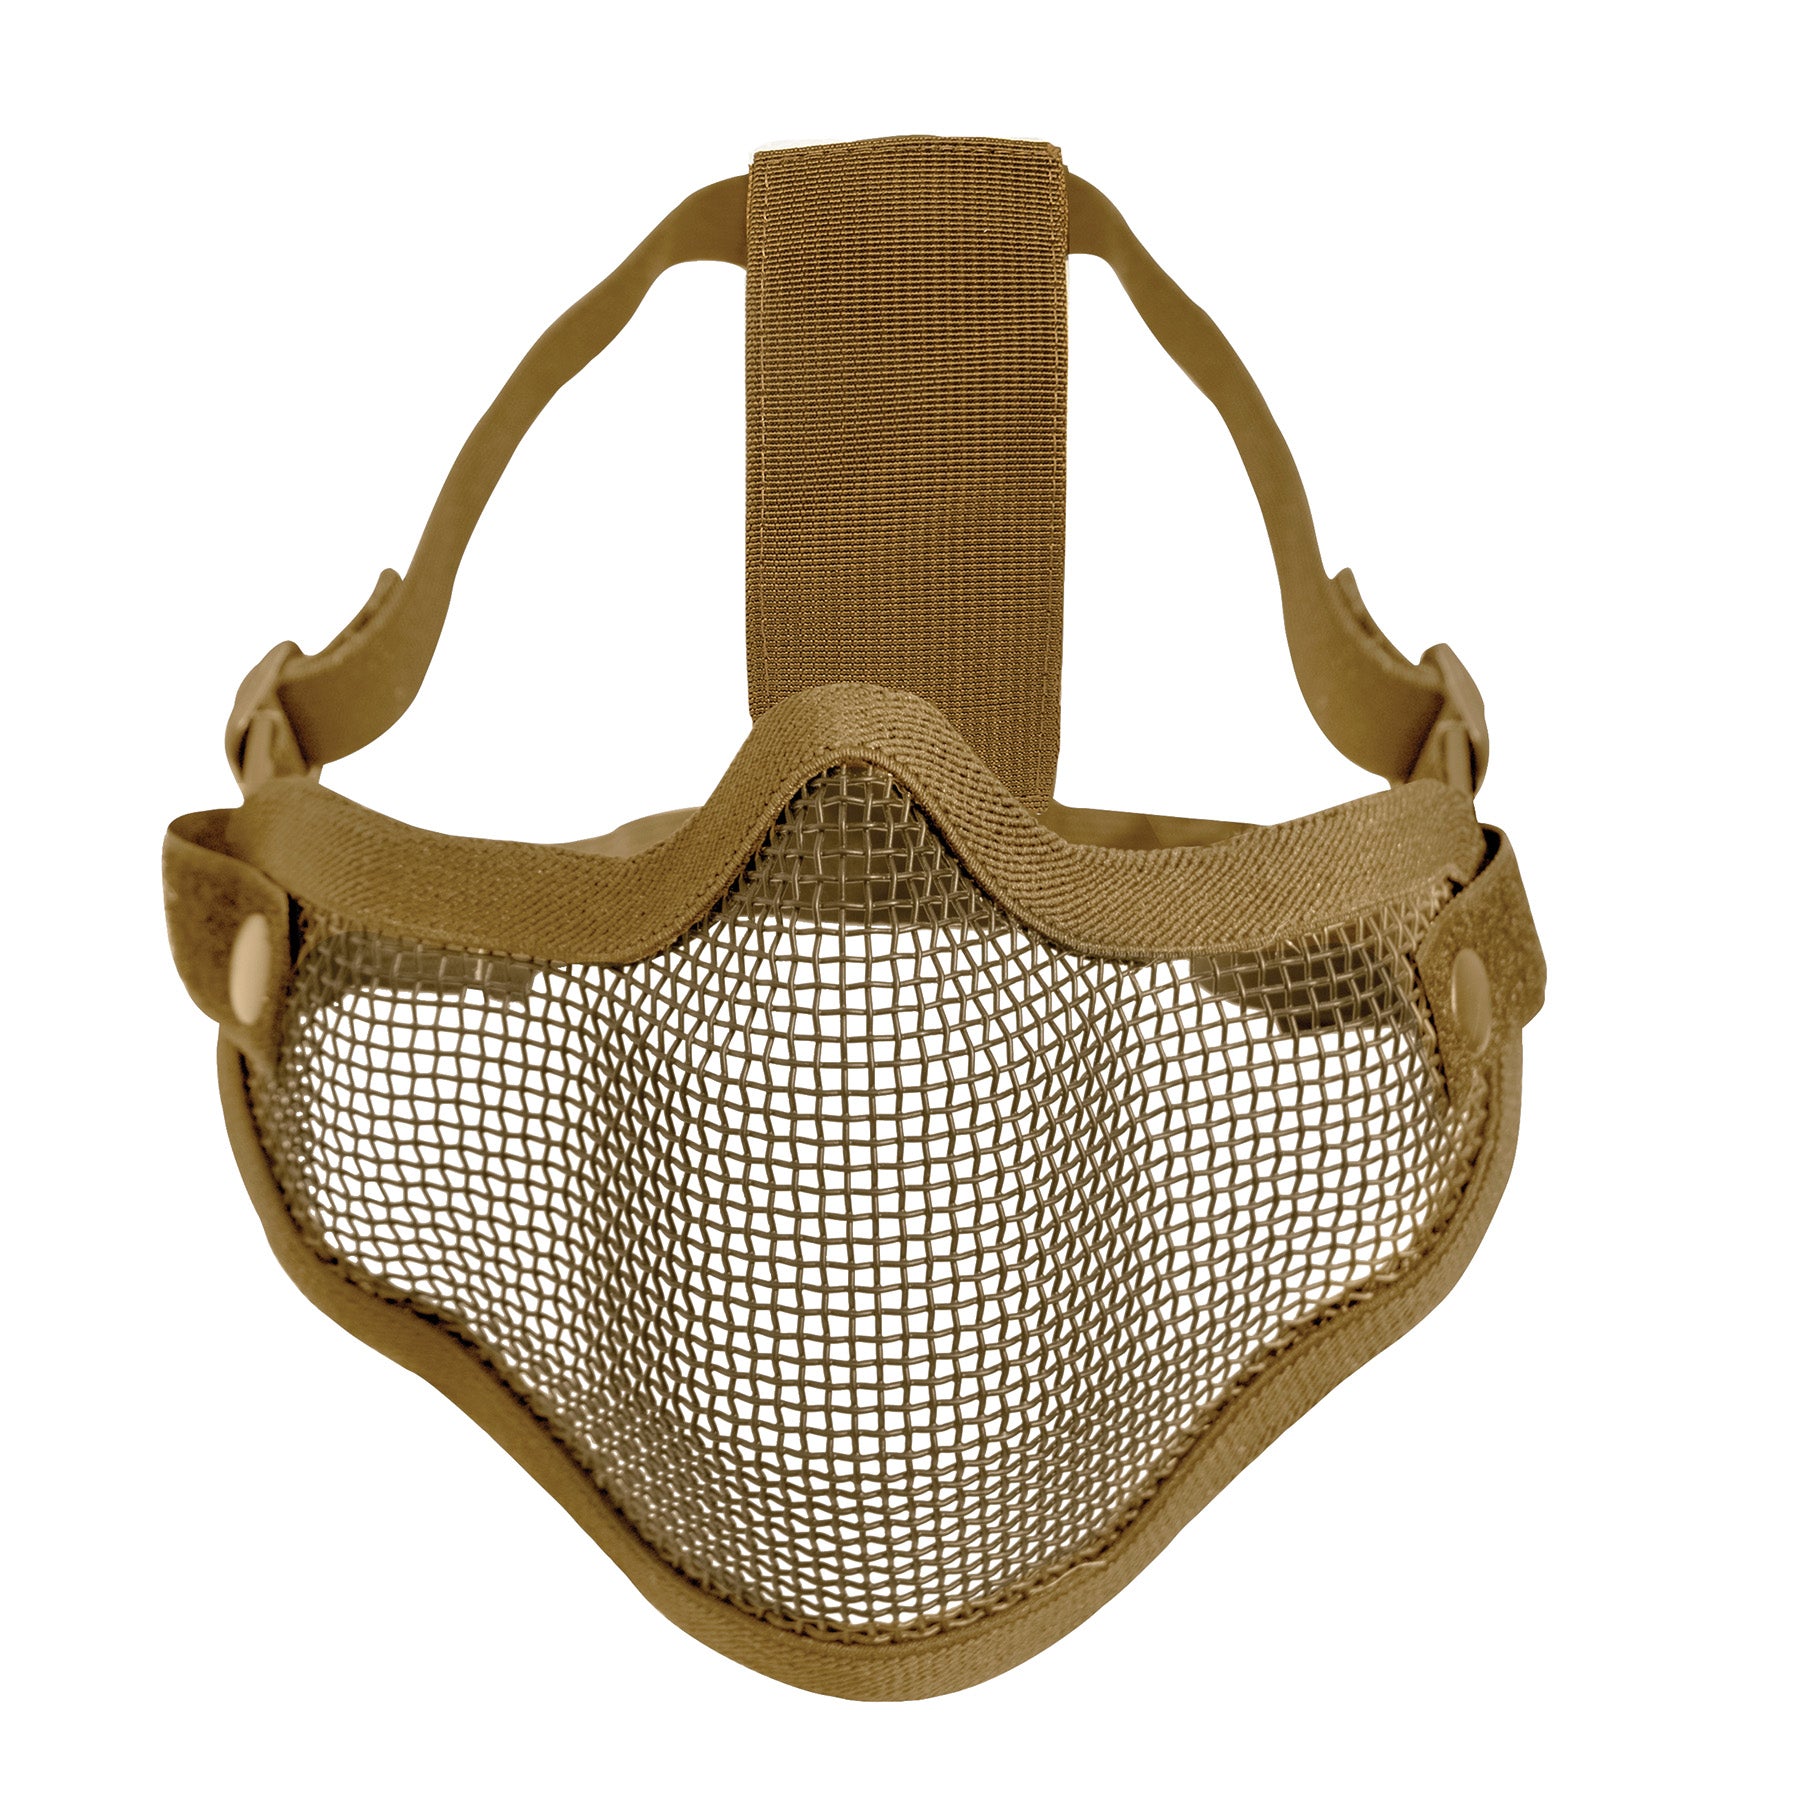 Rothco Carbon Steel Half Face Mask 